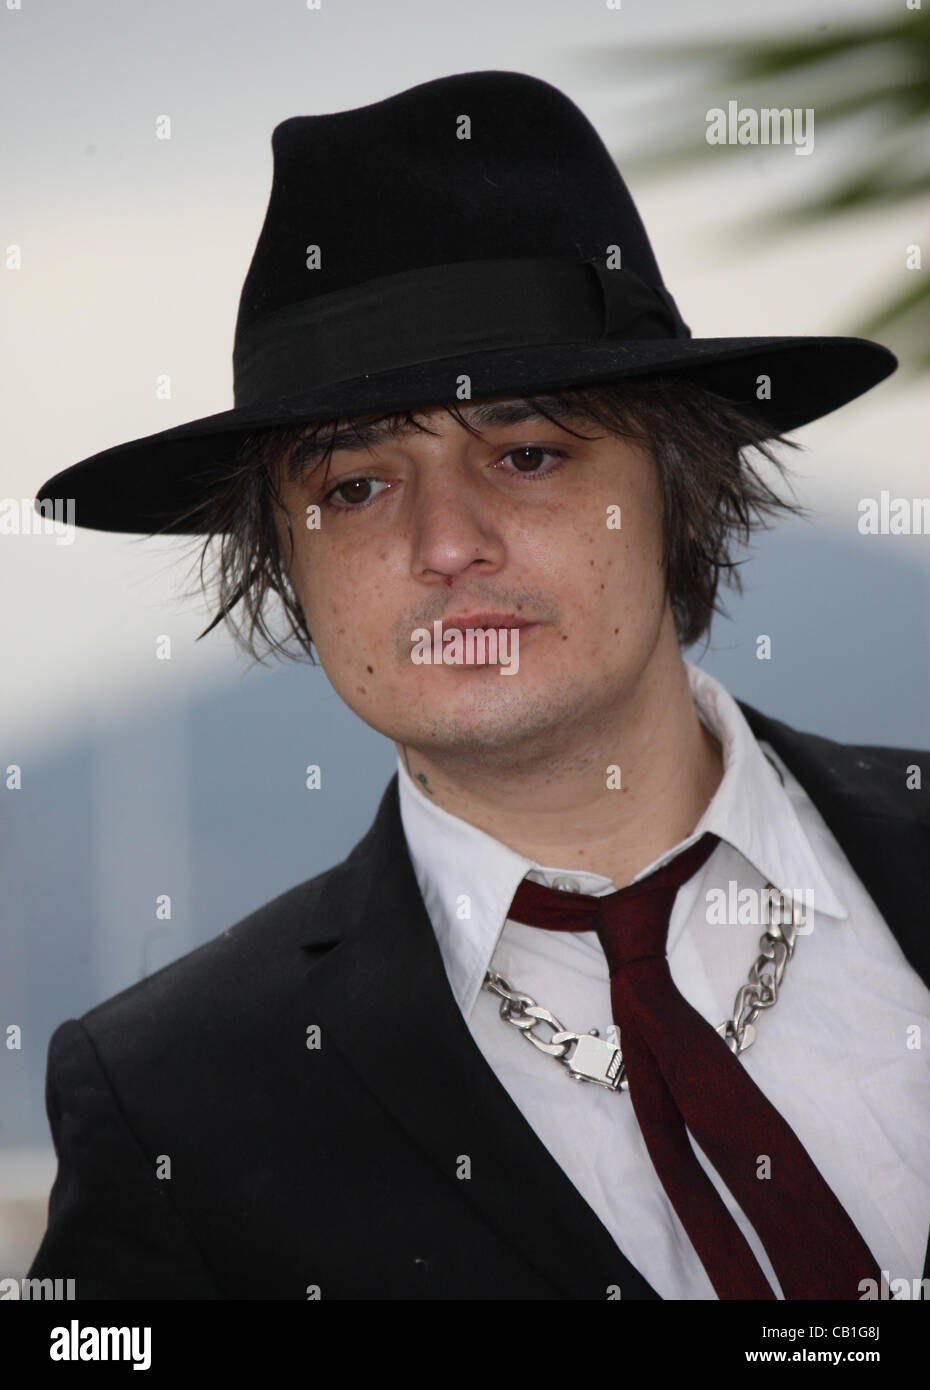 PETE DOHERTY CONFESSIONS OF A CHILD OF THE CENTURY PHOTOCALL CANNES FILM FESTIVAL 2012 PALAIS DES FESTIVAL CANNES FRANCE 20 M Stock Photo